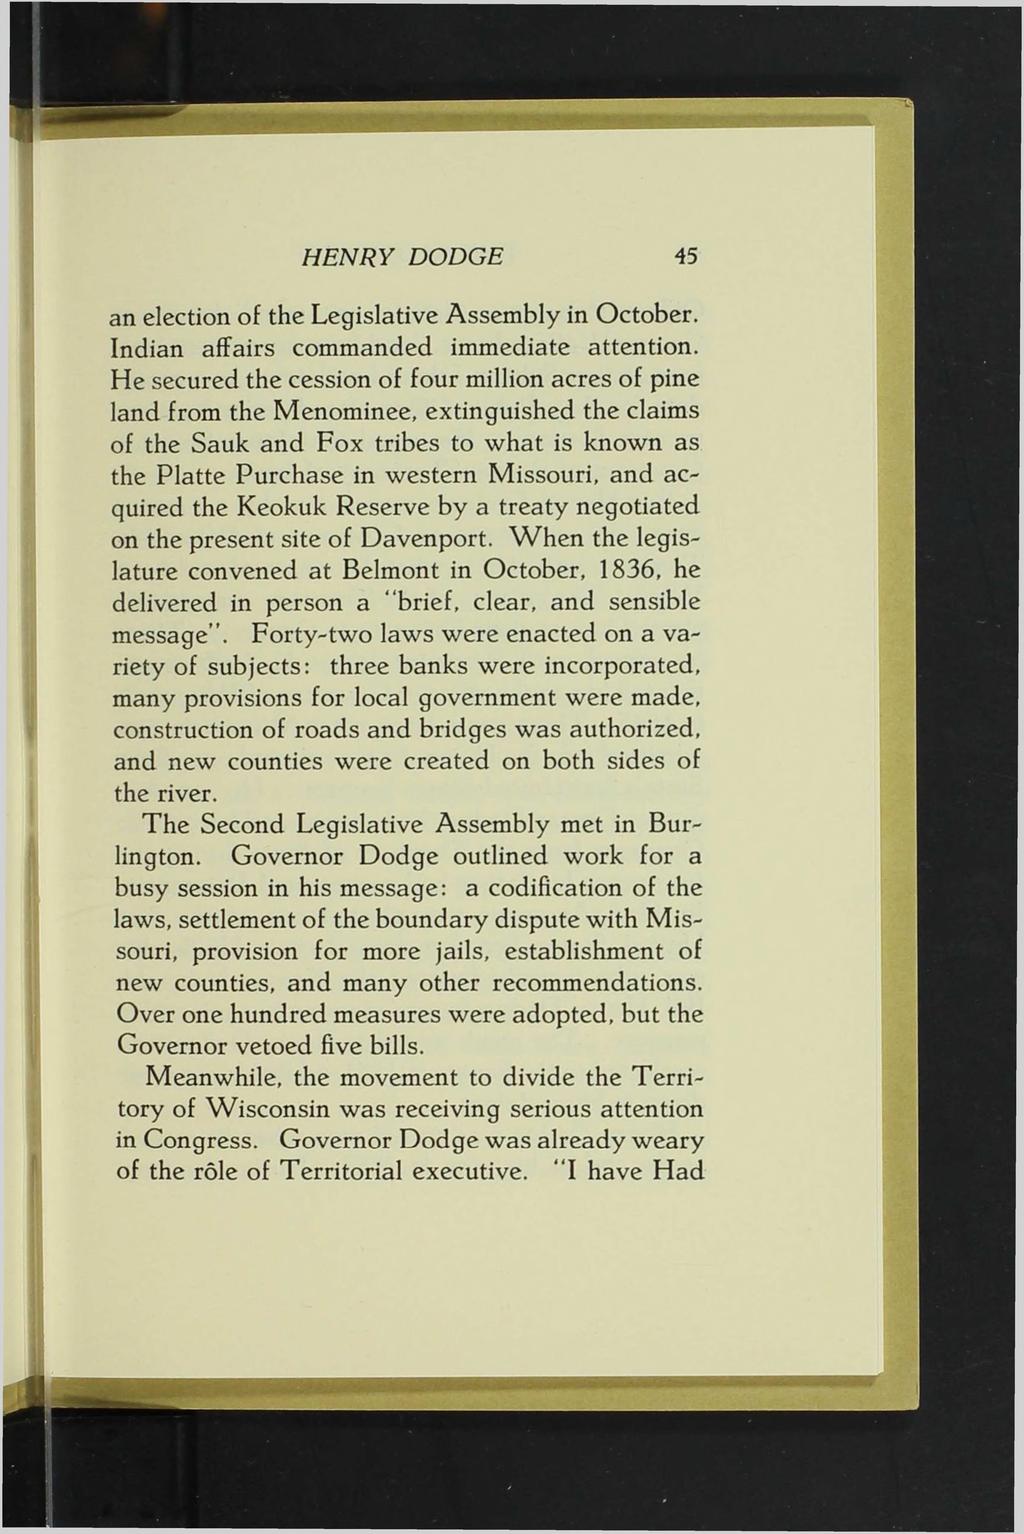 HENRY DODGE 4 5 an election oí the Legislative Assembly in October. Indian affairs commanded immediate attention.